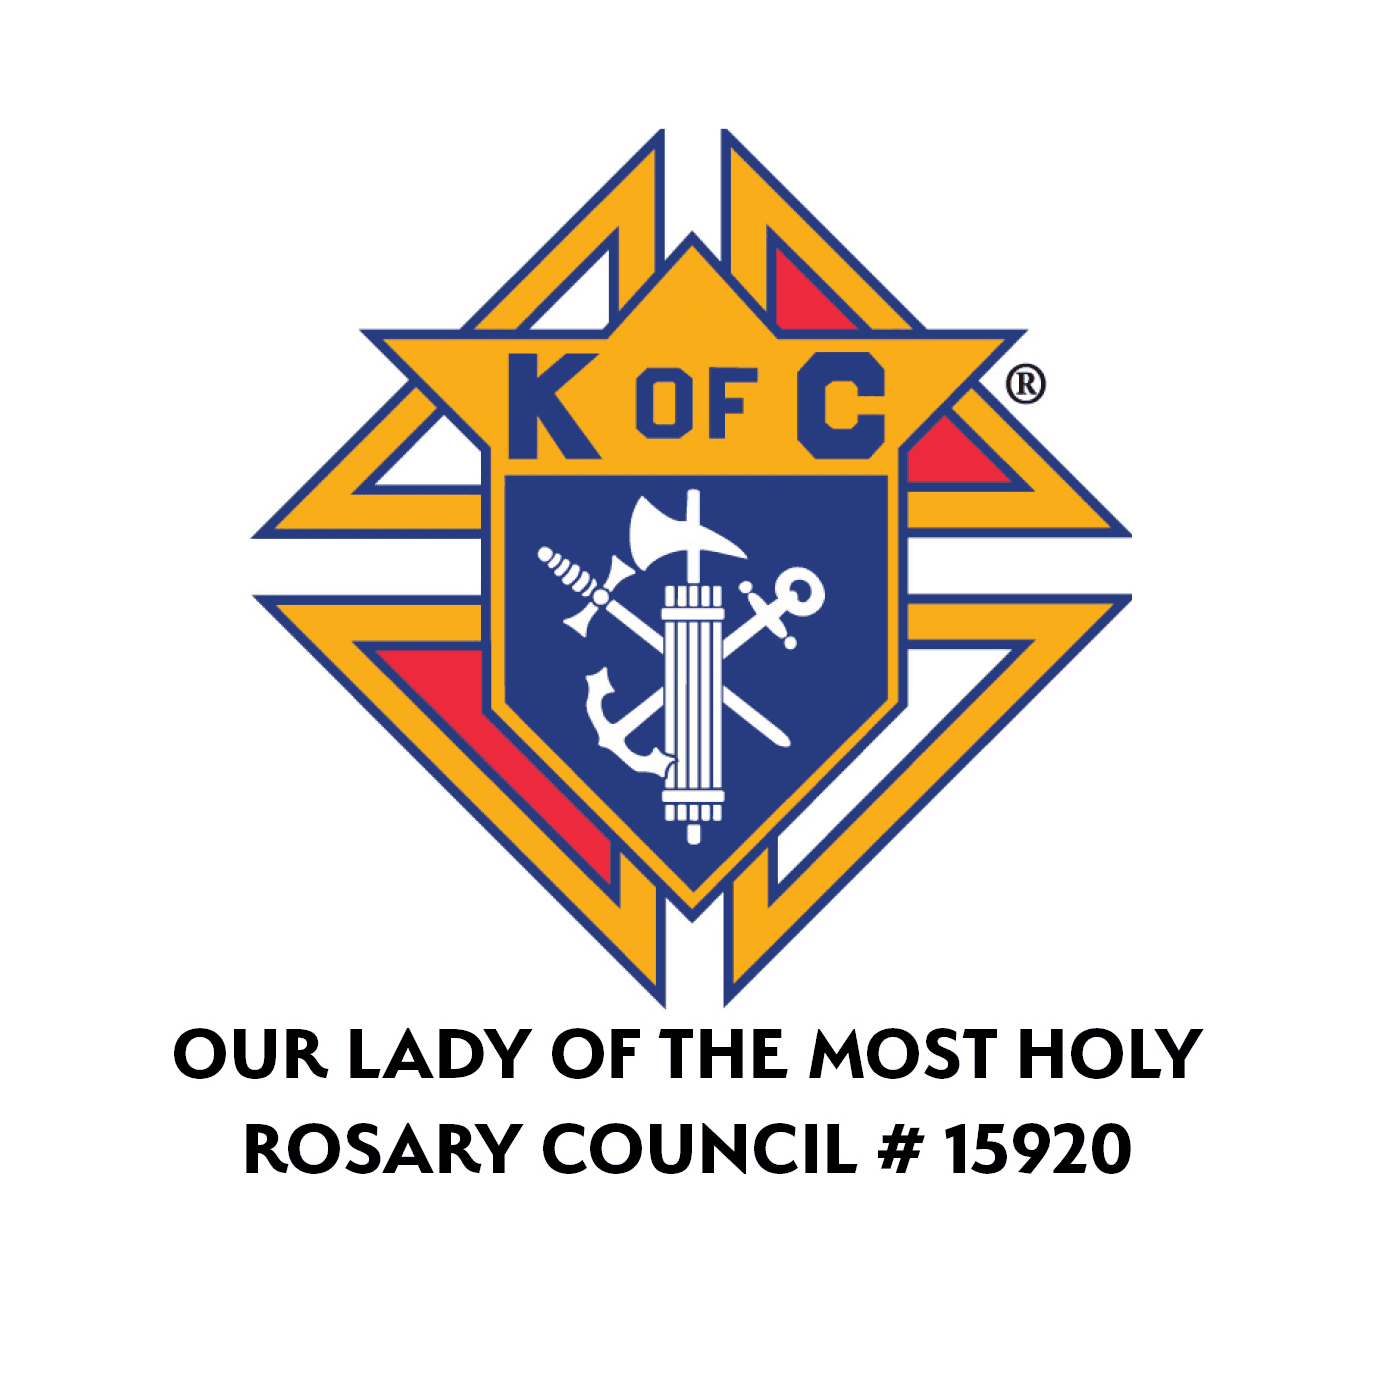 <p>KNIGHTS OF COLUMBUS - OUR LADY OF THE MOST HOLY ROSARY COUNCIL # 15920</p> logo